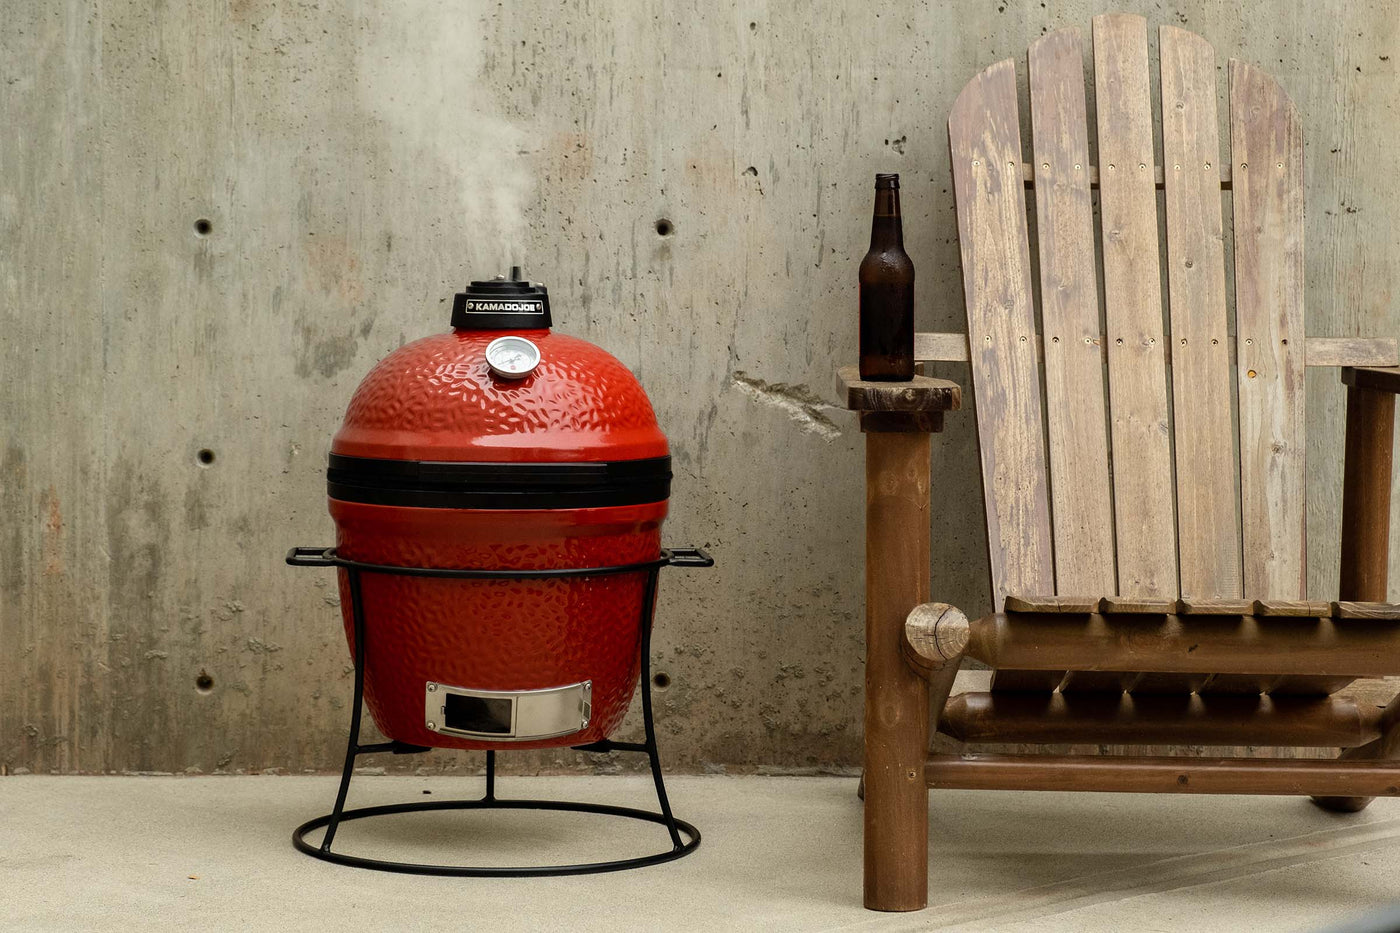 Why Everyone Should Own a Kamado Grill